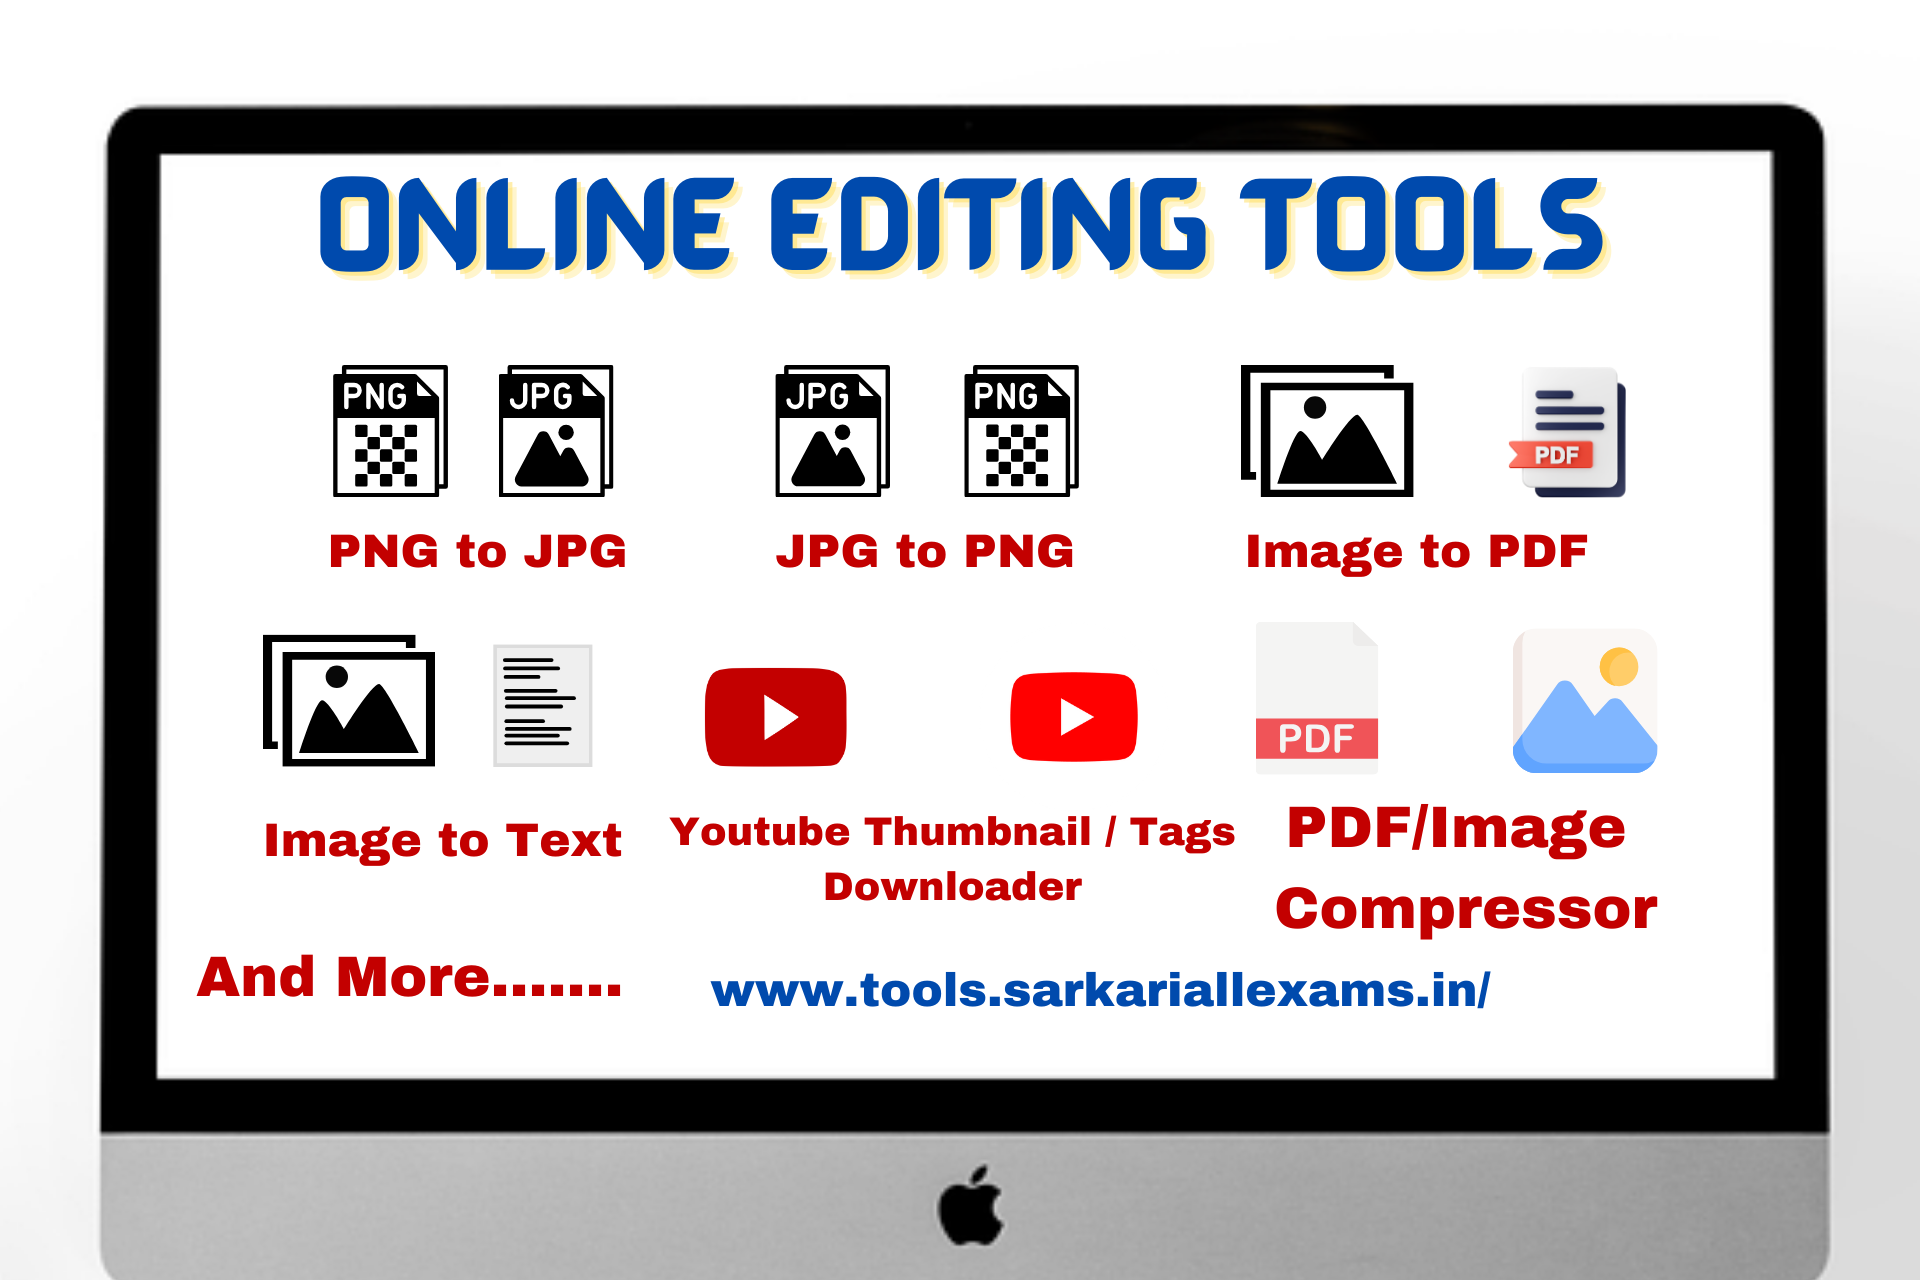 ITS Tools Web - Online Image and PDF Tools